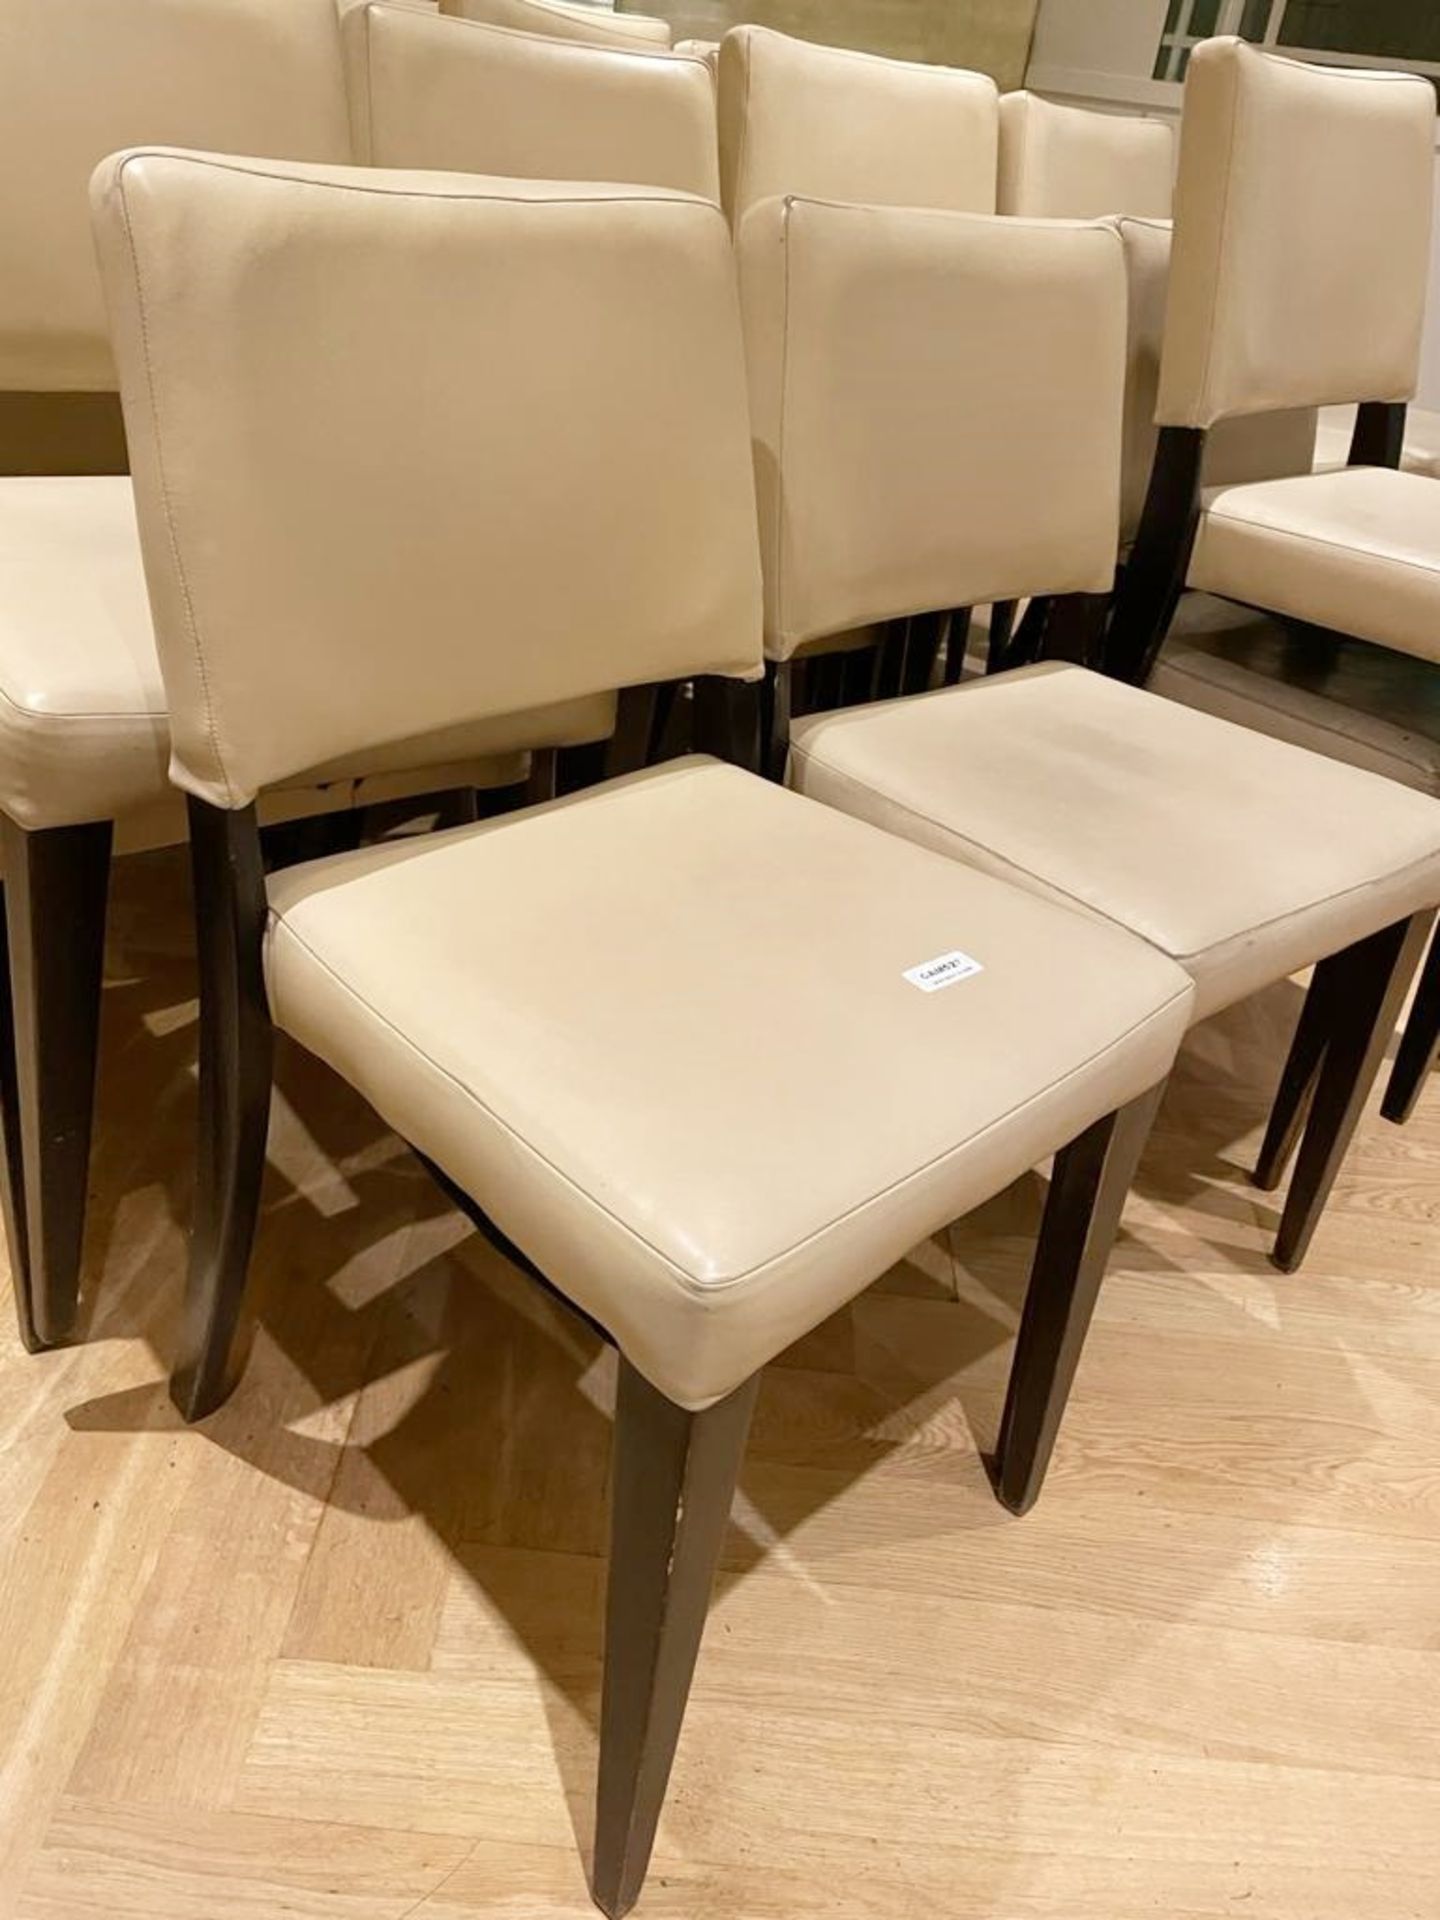 22 x Cream Leather Upholstered Restaurant Dining Chairs With Sturdy Wooden Frames - Ref: CAM527/A - Image 8 of 10